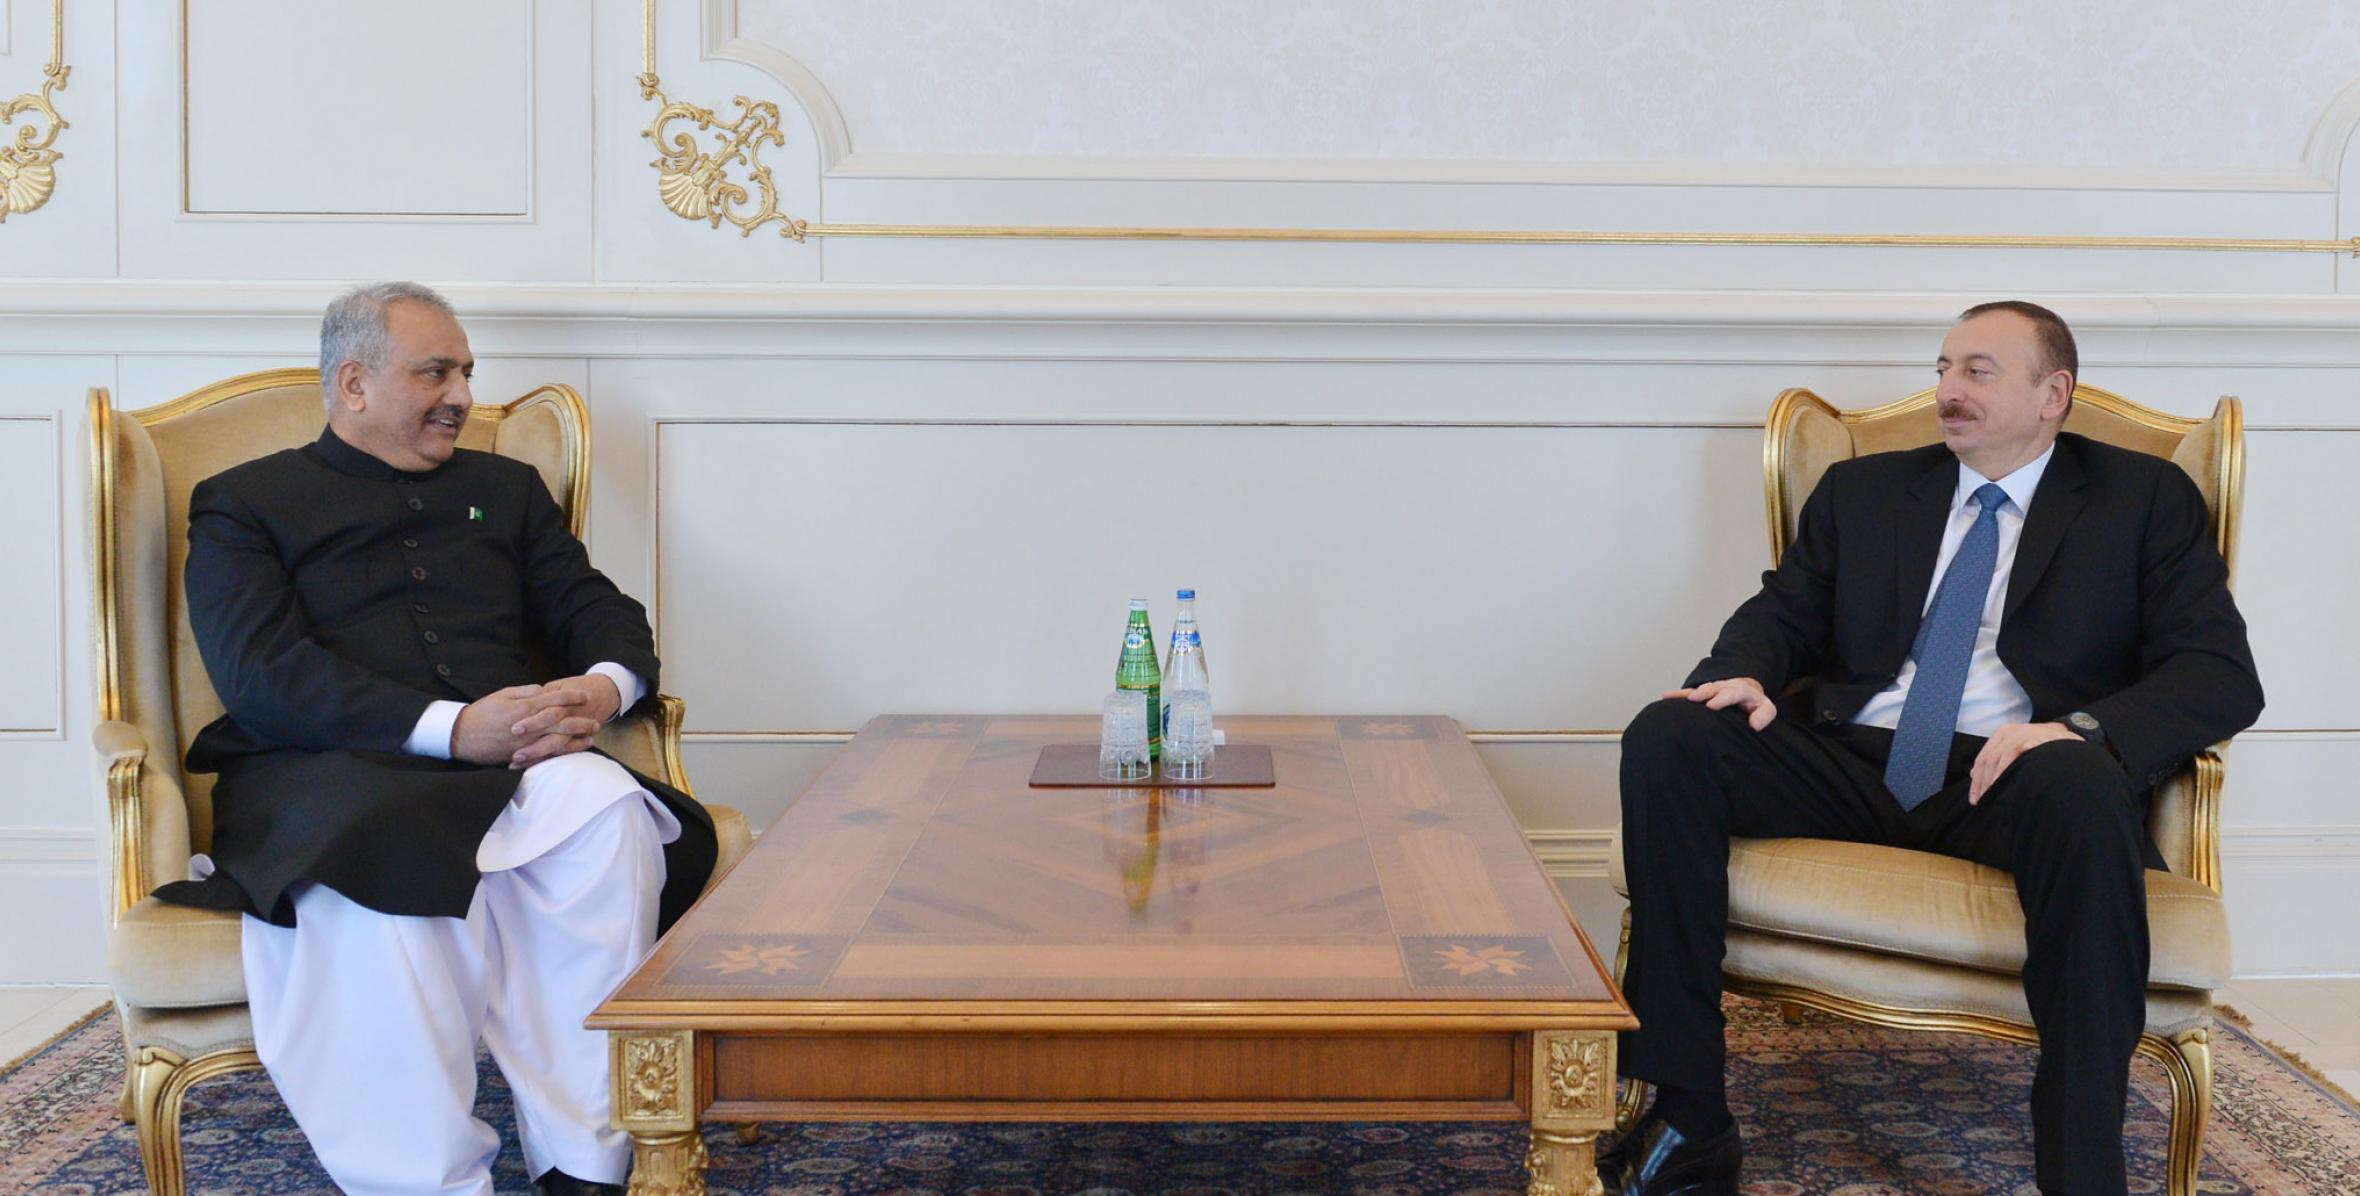 Ilham Aliyev accepted the credentials of the newly-appointed ambassador of Pakistan to Azerbaijan